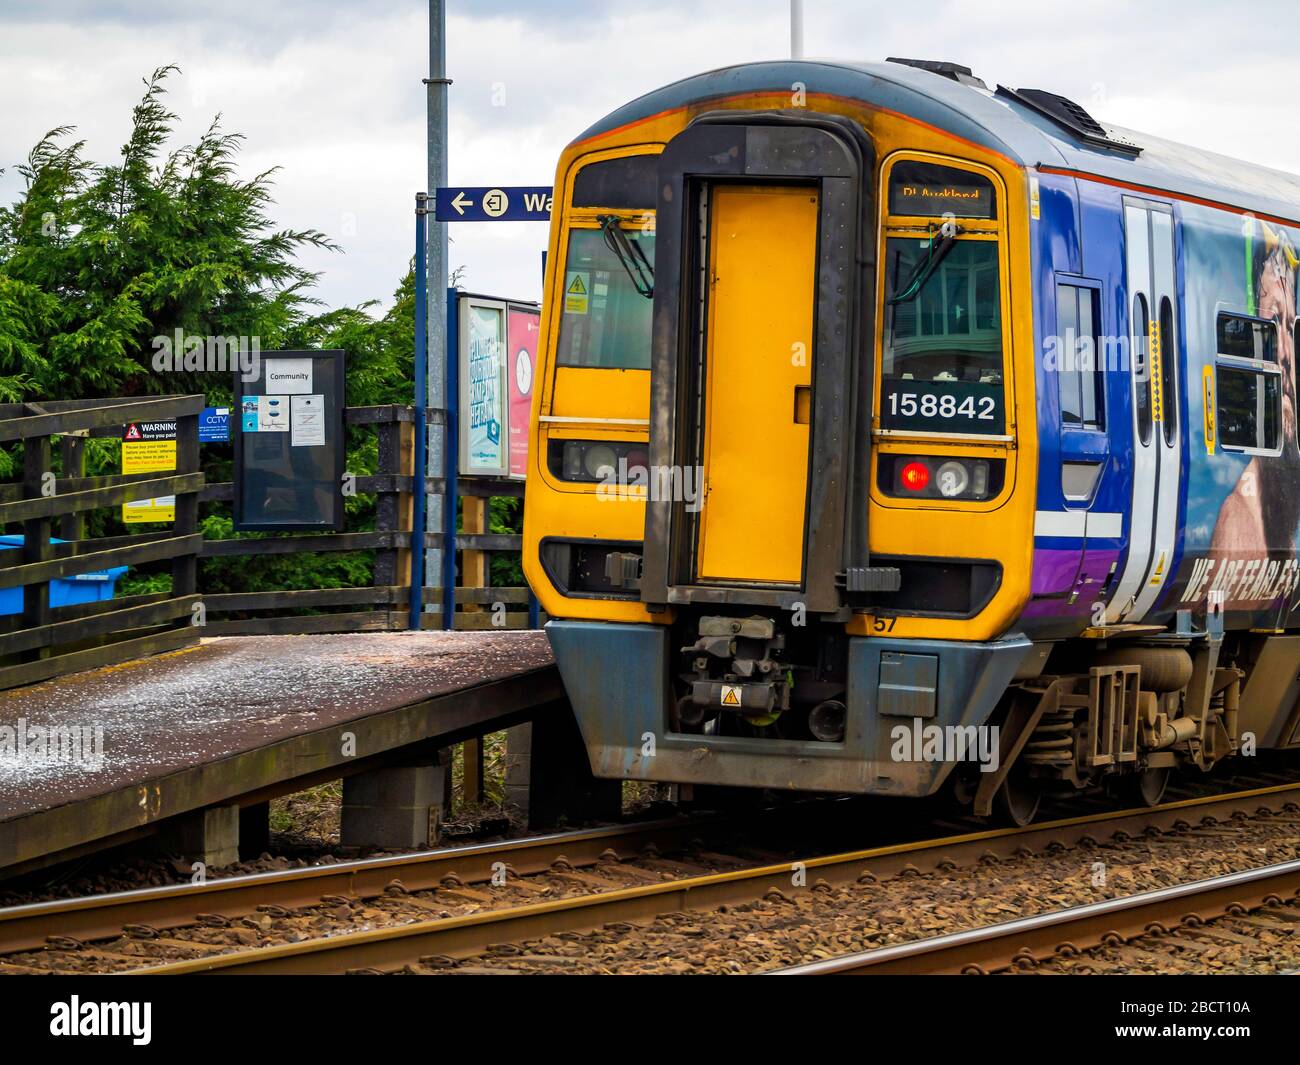 Northern Rail train 158842 stopped at Longbeck on its way to Bishop Auckland.  This is a refurbished Class 158 train replacing the previous Pacers. Stock Photo